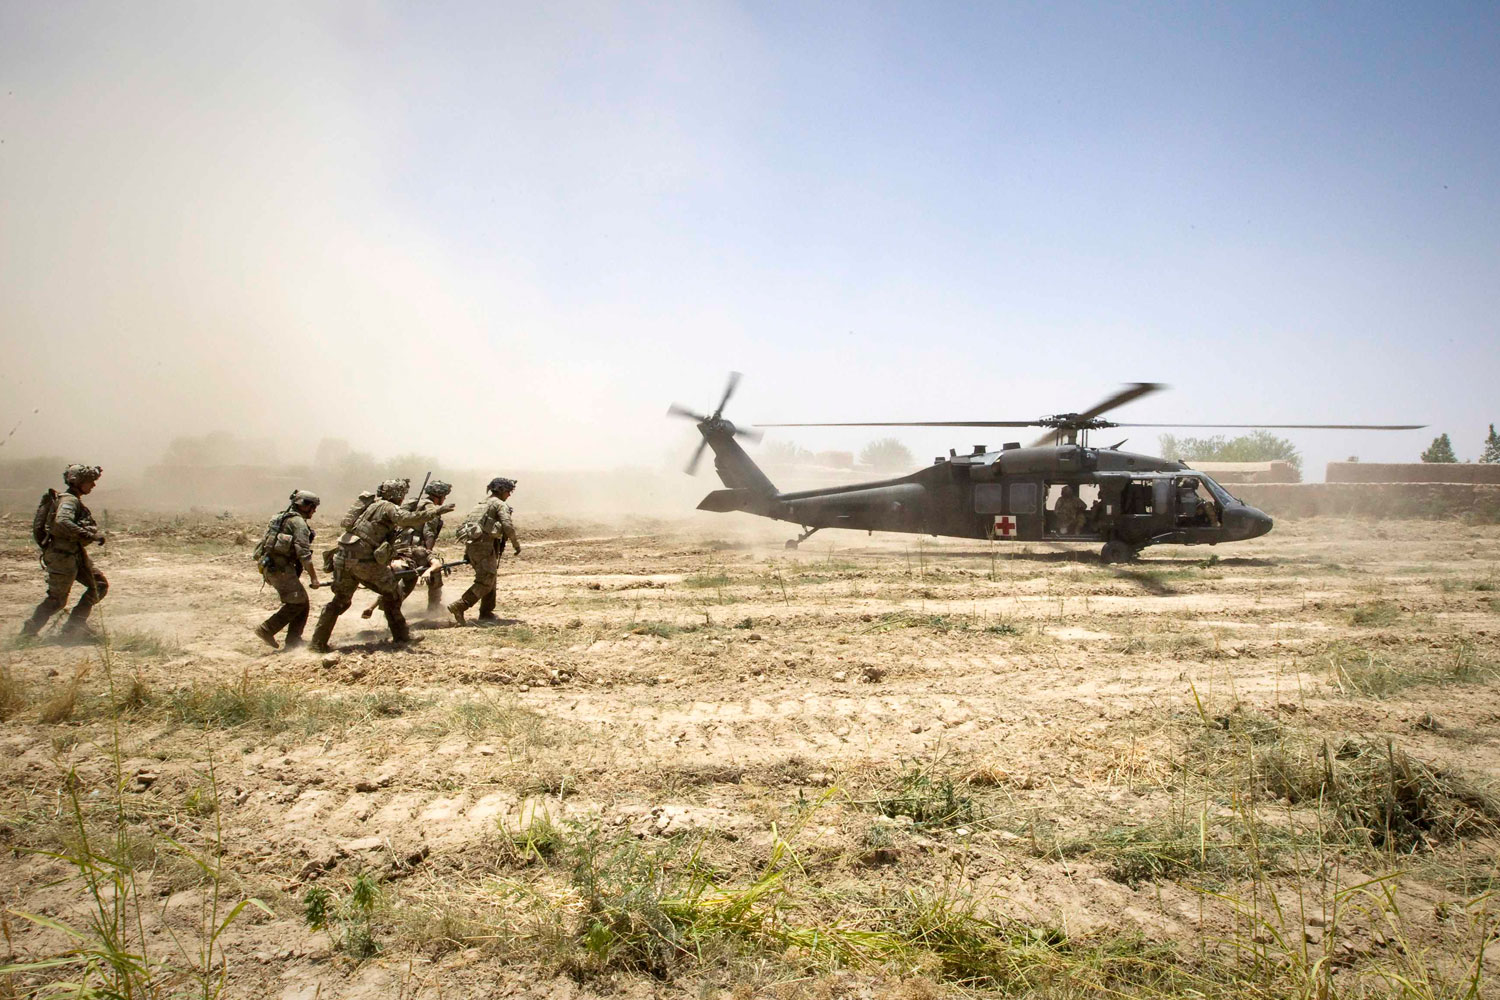 June 12, 2012. U.S. Army soldiers carry their comrade wounded at patrol by an improvised explosive device (IED) towards a Blackhawk Medevac helicopter in southern Afghanistan.